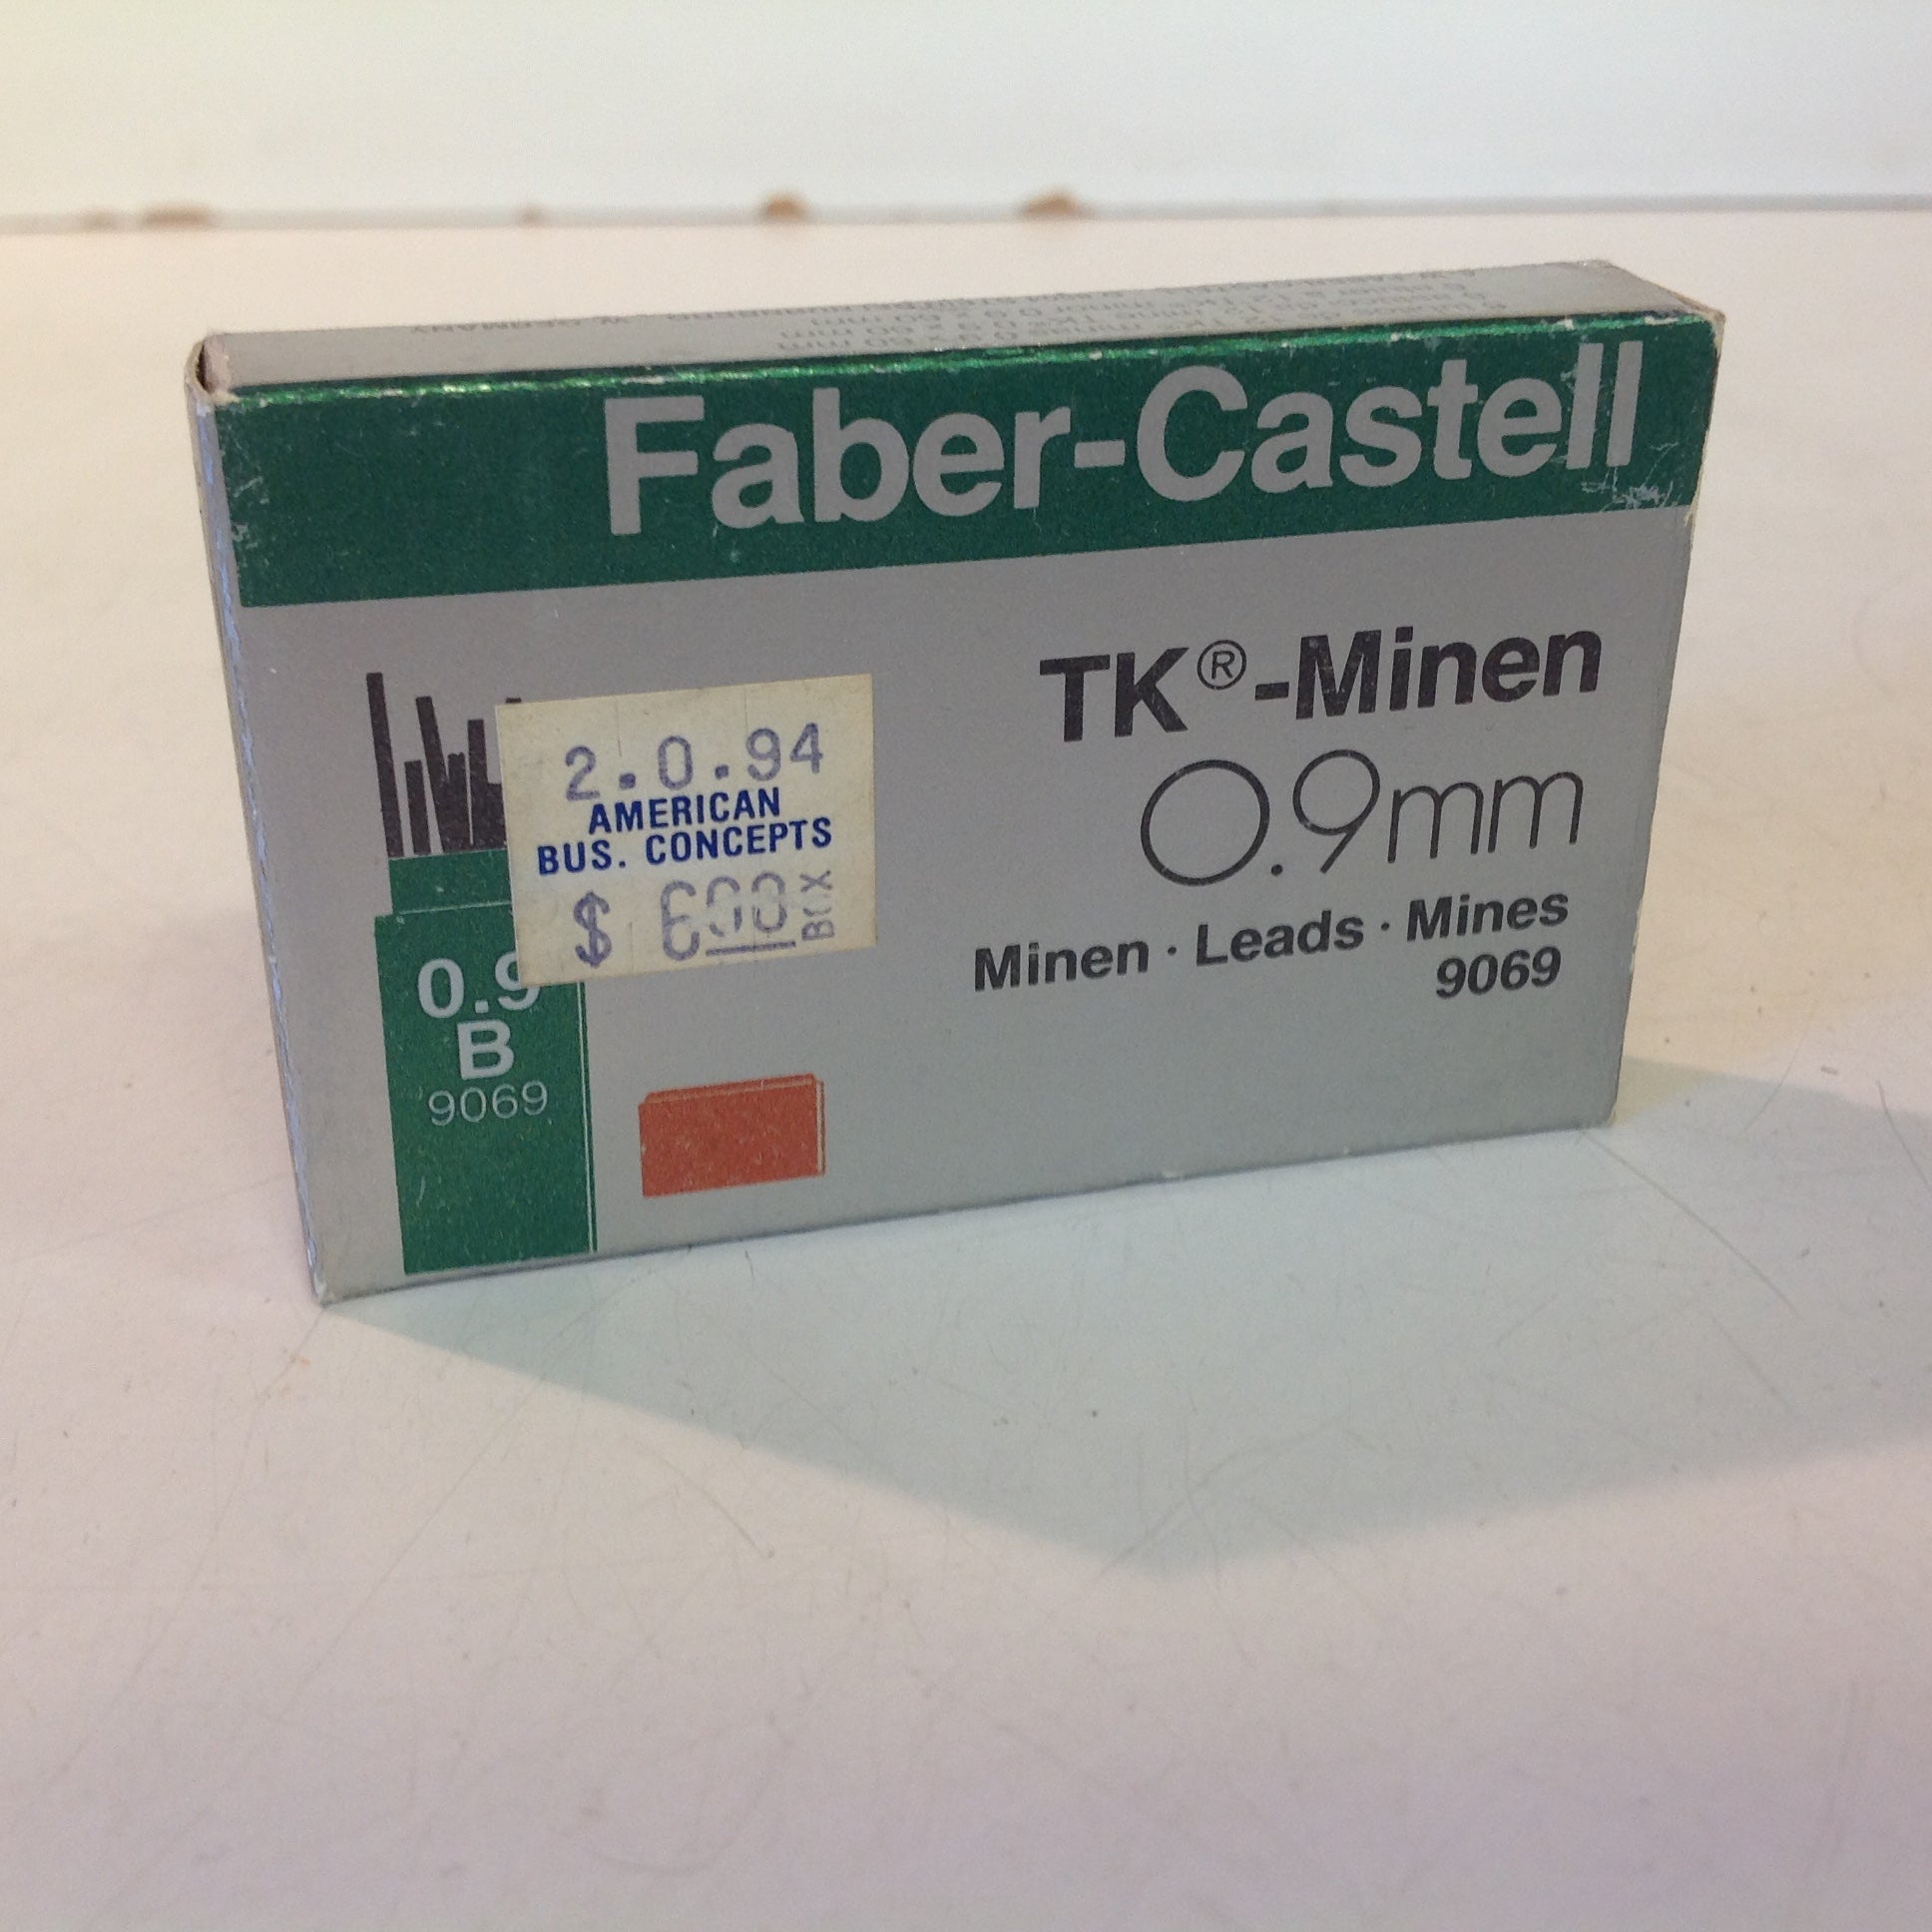 Vintage 1990's Faber-Castell Mechanical Pencil NOS Refill  Lead TK-Minen"3H" 0.9 mm 9069 Box of 6